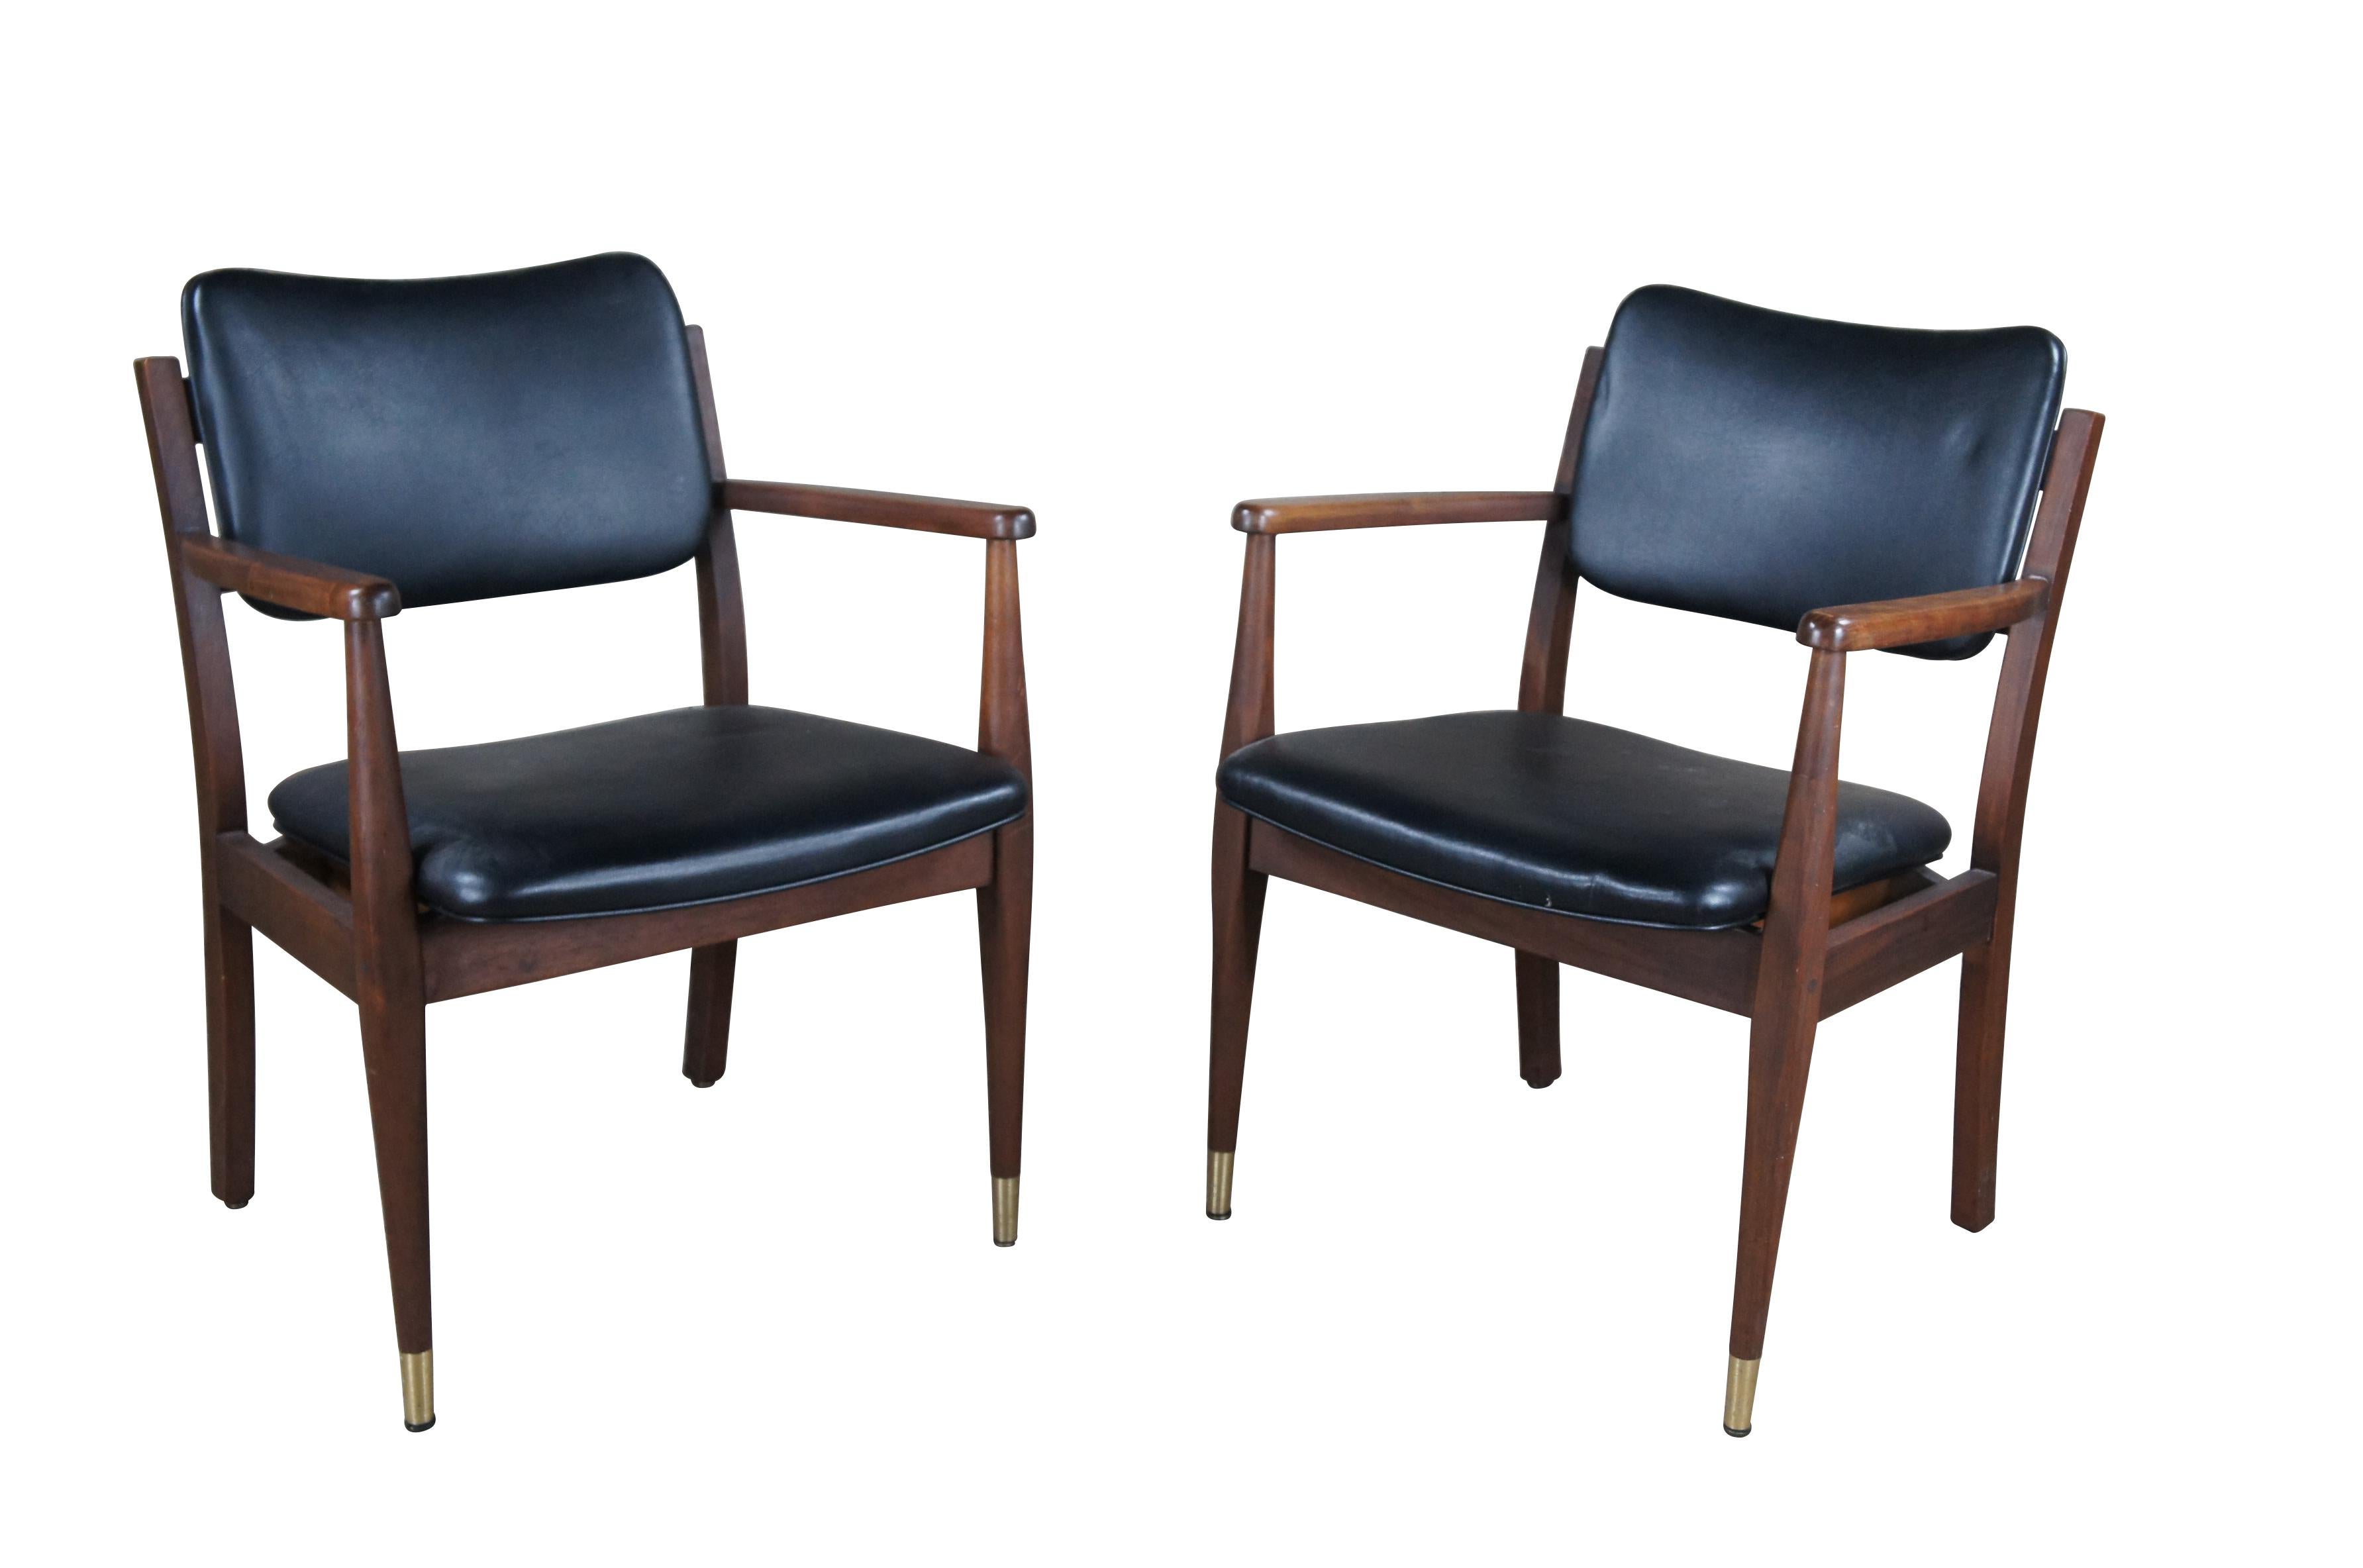 Pair of vintage Gregson Furniture Industries Danish style Arm Chairs, circa 1983.  Made of walnut with black leather seat and back.  Features nailheads along the backside.  

Gregson Furniture Industries, Liberty North Carolina was founded in 1921